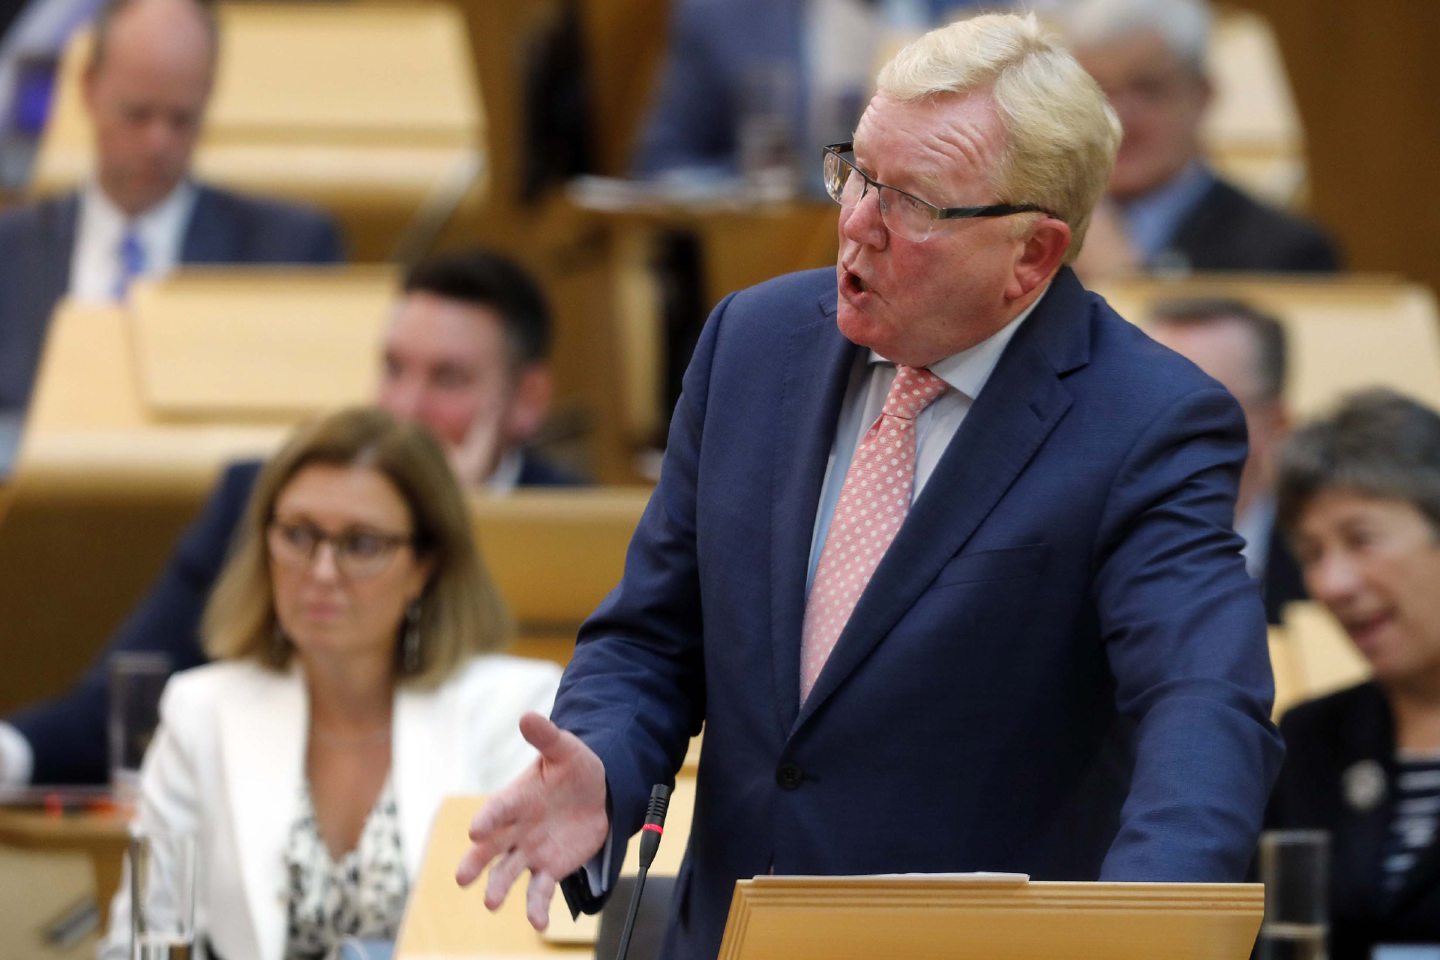 Jackson Carlaw MSP  pictured as  First Minister Nicola Sturgeon MSP announces the Scottish Governments Programme for Government 2019-20 at the Scottish Parliament, Edinbugrh.  03 September 2019.  Pic - Andrew Cowan/Scottish Parliament